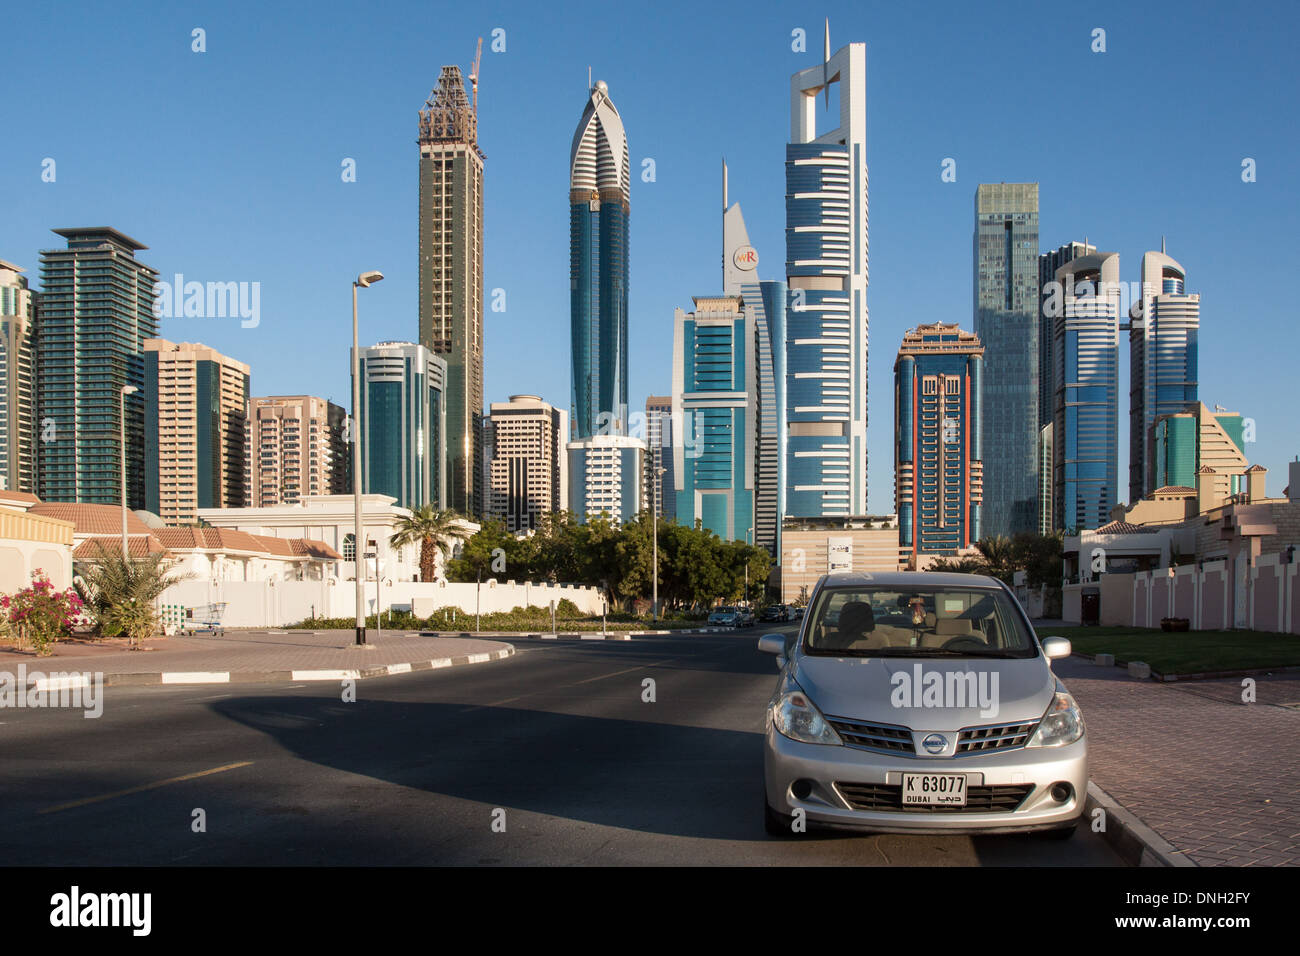 SKYLINE OF THE FINANCIAL CENTER AND SHEIKH ZAYED ROAD WITH, NOTABLY, THE TOWER IN THE FORM OF A PIANO KEYBOARD, FINANCIAL CENTER, DUBAI, UNITED ARAB EMIRATES, MIDDLE EAST Stock Photo